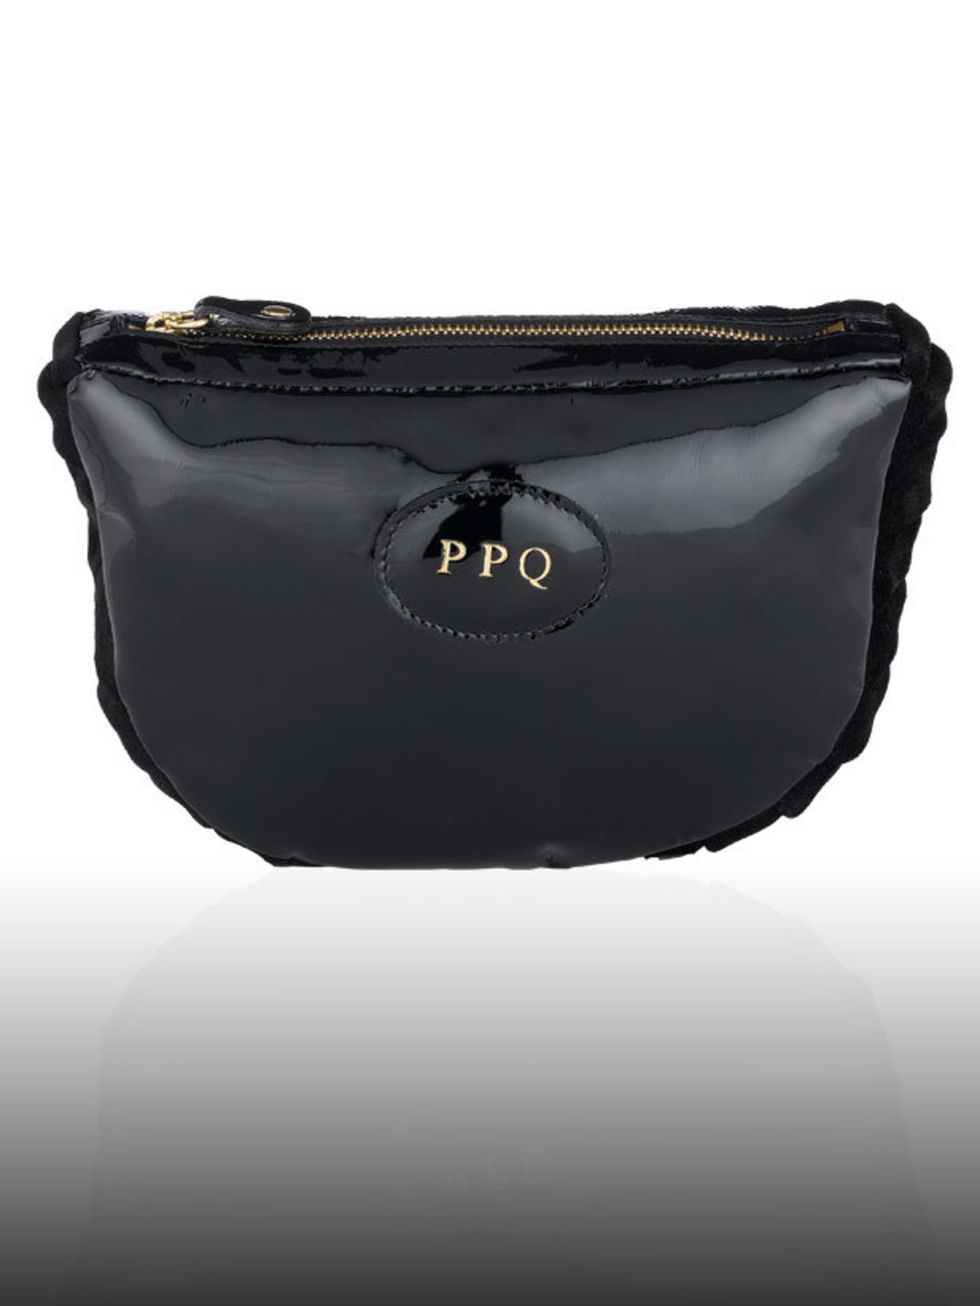 <p>Fallon make-up bag, £175 by PPQ. For the stockist call 0207 494 9789.</p><p>Kimberly was front row at the PPQ A/W 08 show in London and found this fabulous make-up bag among the goodies she received from the designers and has been using it ever since.<